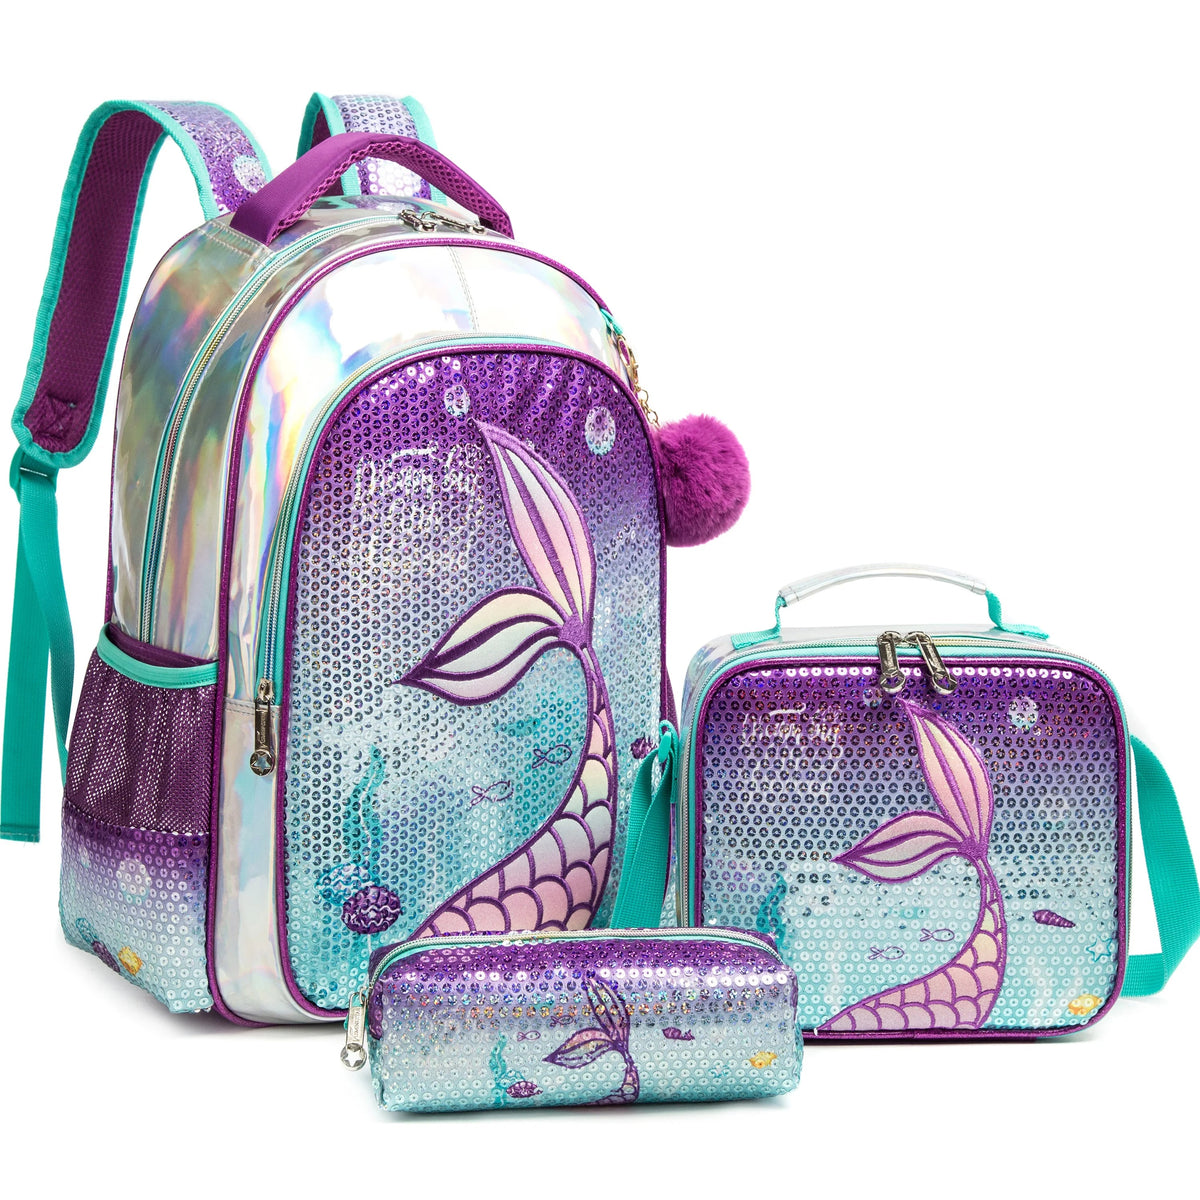 Meetbelify Mermaid Backpack Set for Girls - School Bag with Lunch Box, Ideal for Elementary Students (Ages 5-8) SKY BLUE